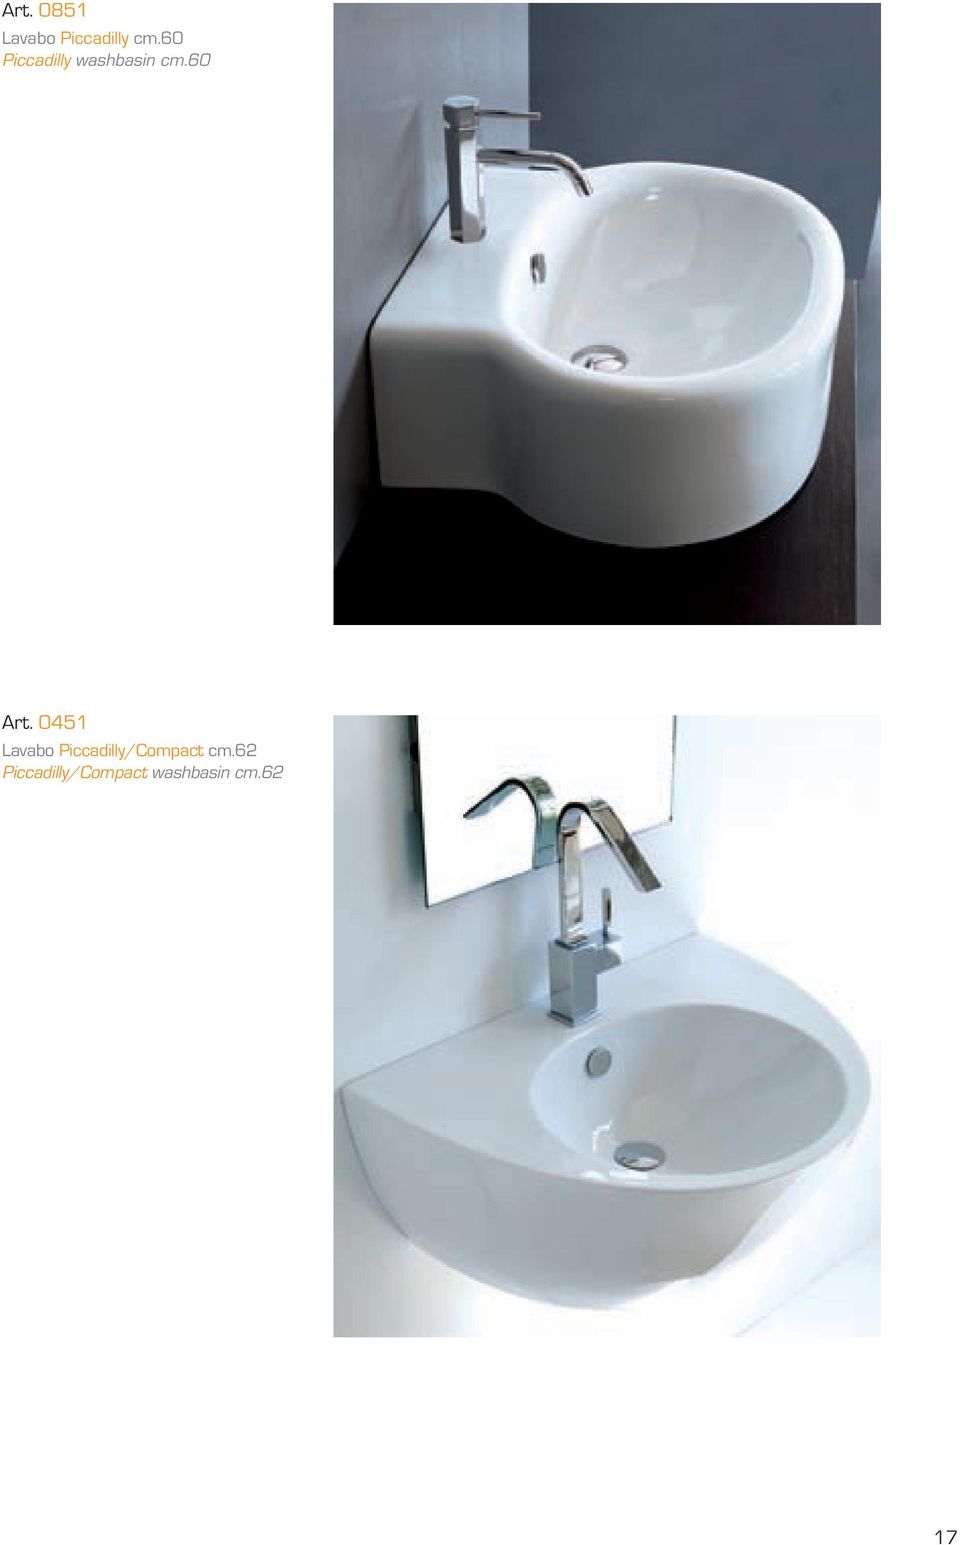 0451 Lavabo Piccadilly/Compact cm.